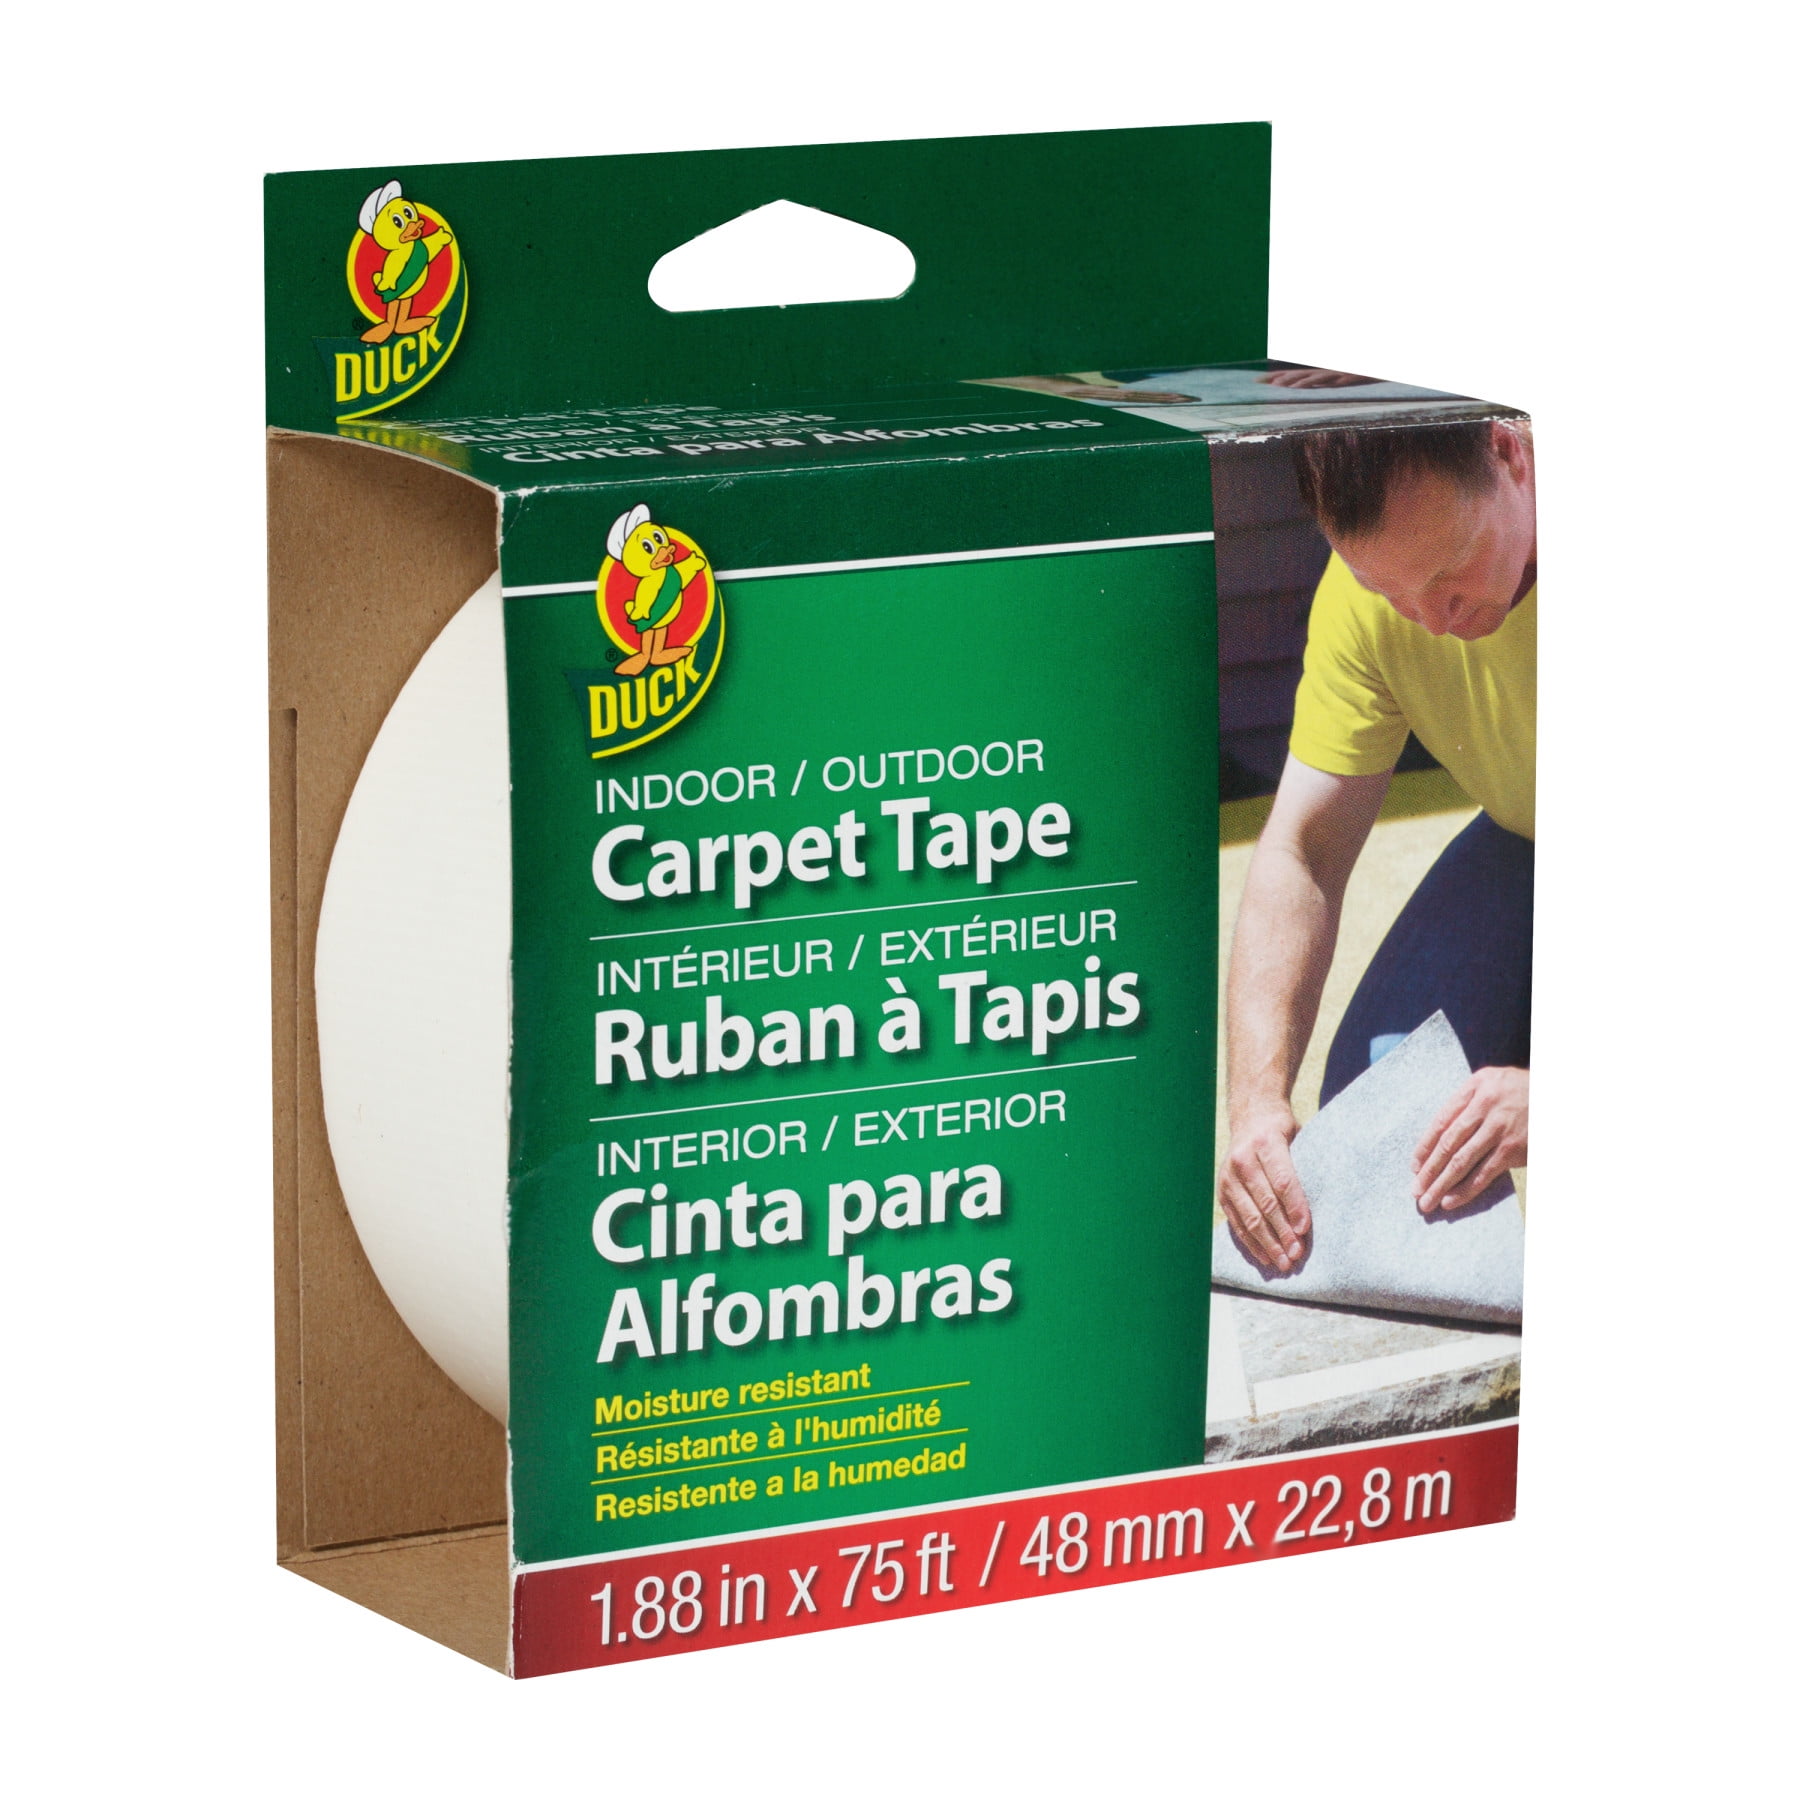 Double Sided Carpet Tape 2.5'W for Area Rugs – Keeping Carpets & Rugs in Place, Wood Working & Craft Projects 33 Yards (100FT) by PRETMANNS